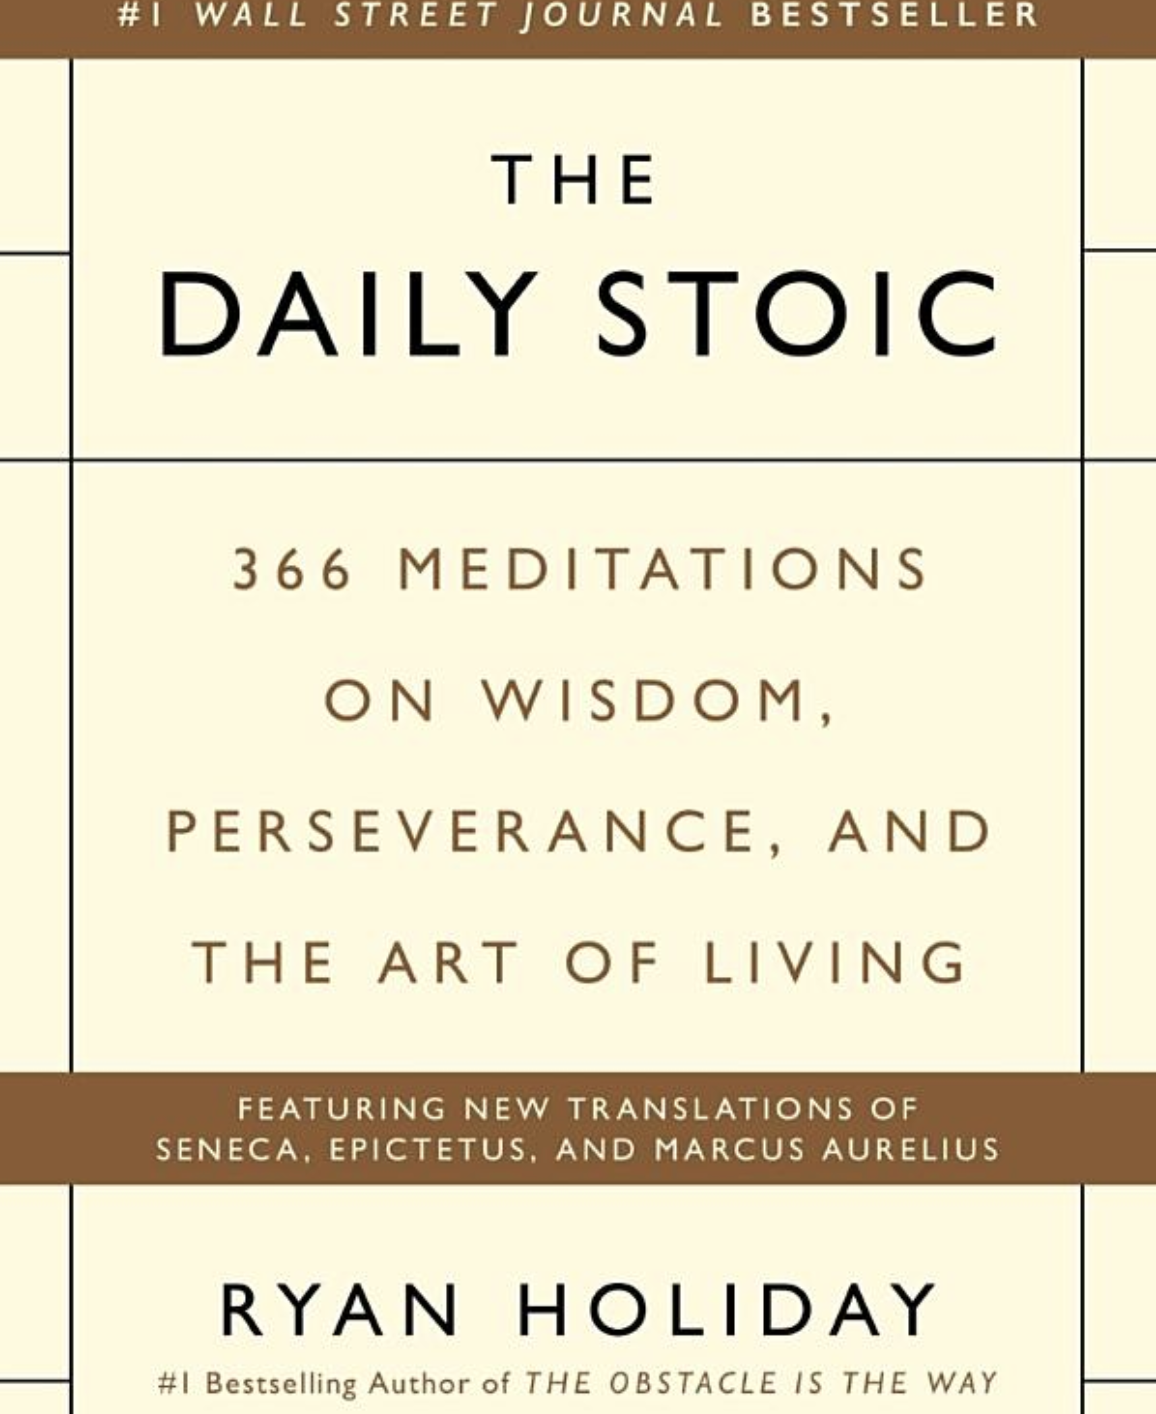 The Daily Stoic